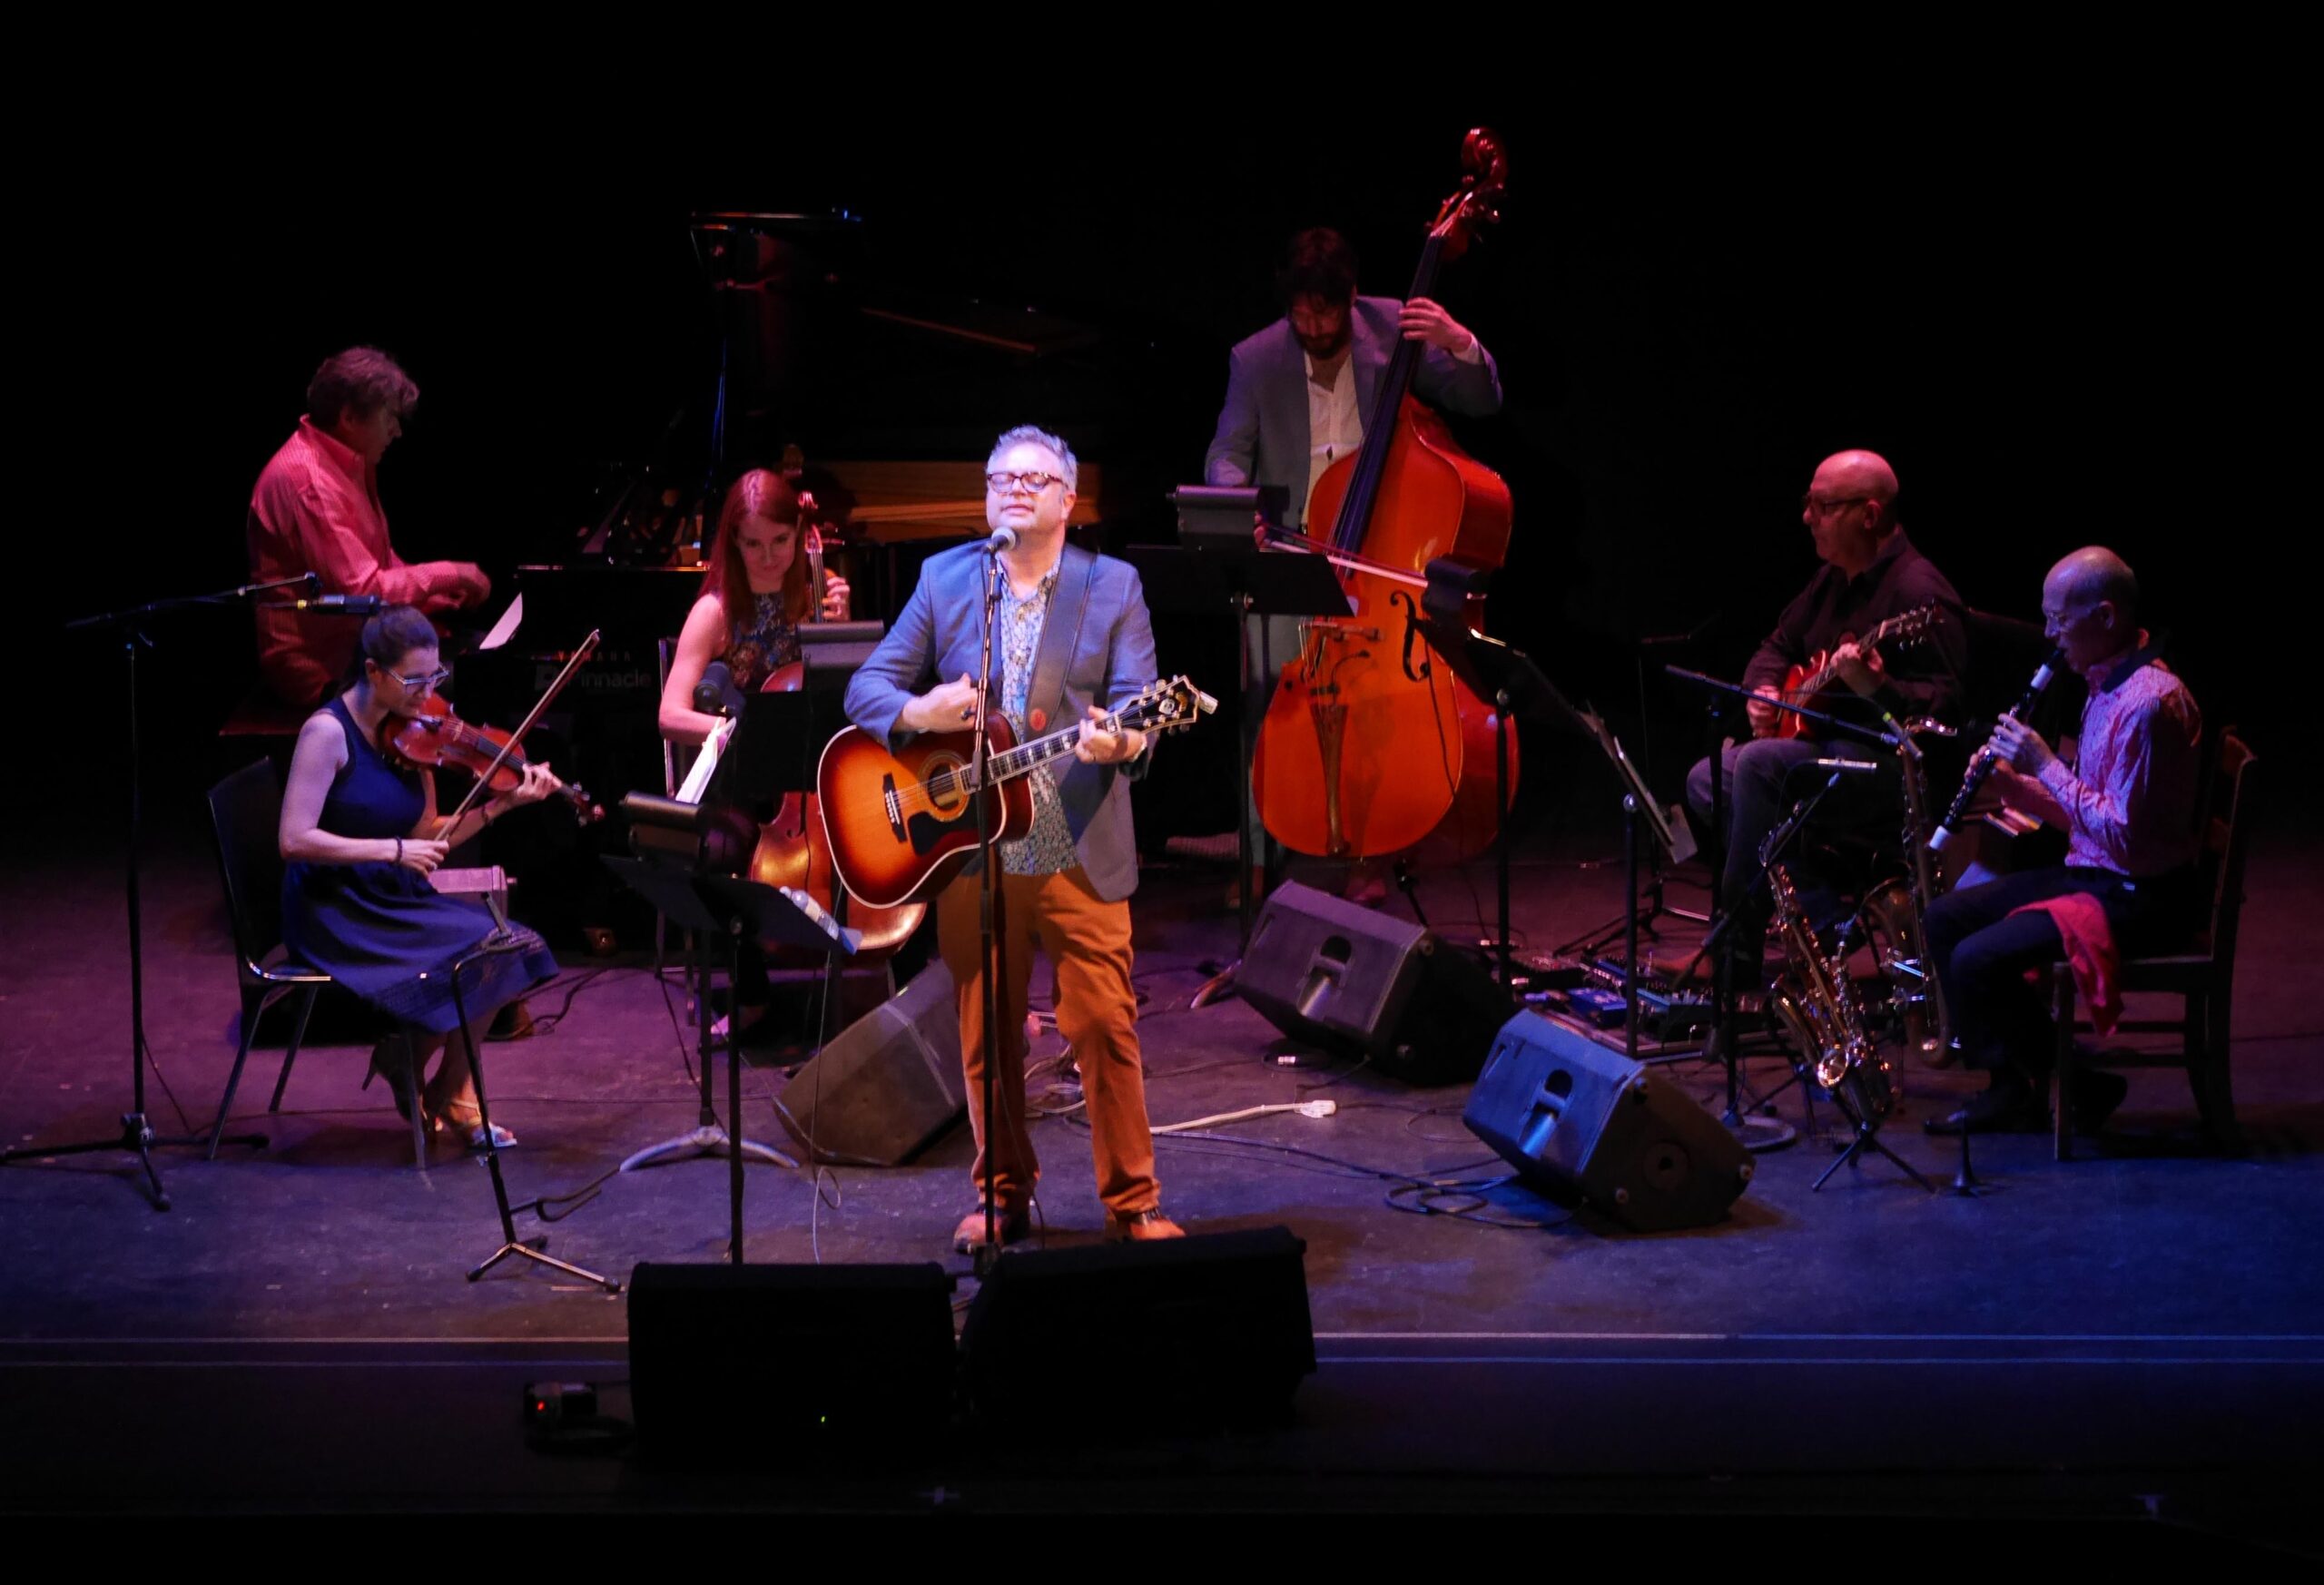 Stephen Page stands at a microphone, guitar in hand, as he sings. He is surrounded by a six-piece musical ensemble of string instruments, all faintly lit with red and blue lights. Image provided by County Stage Company.